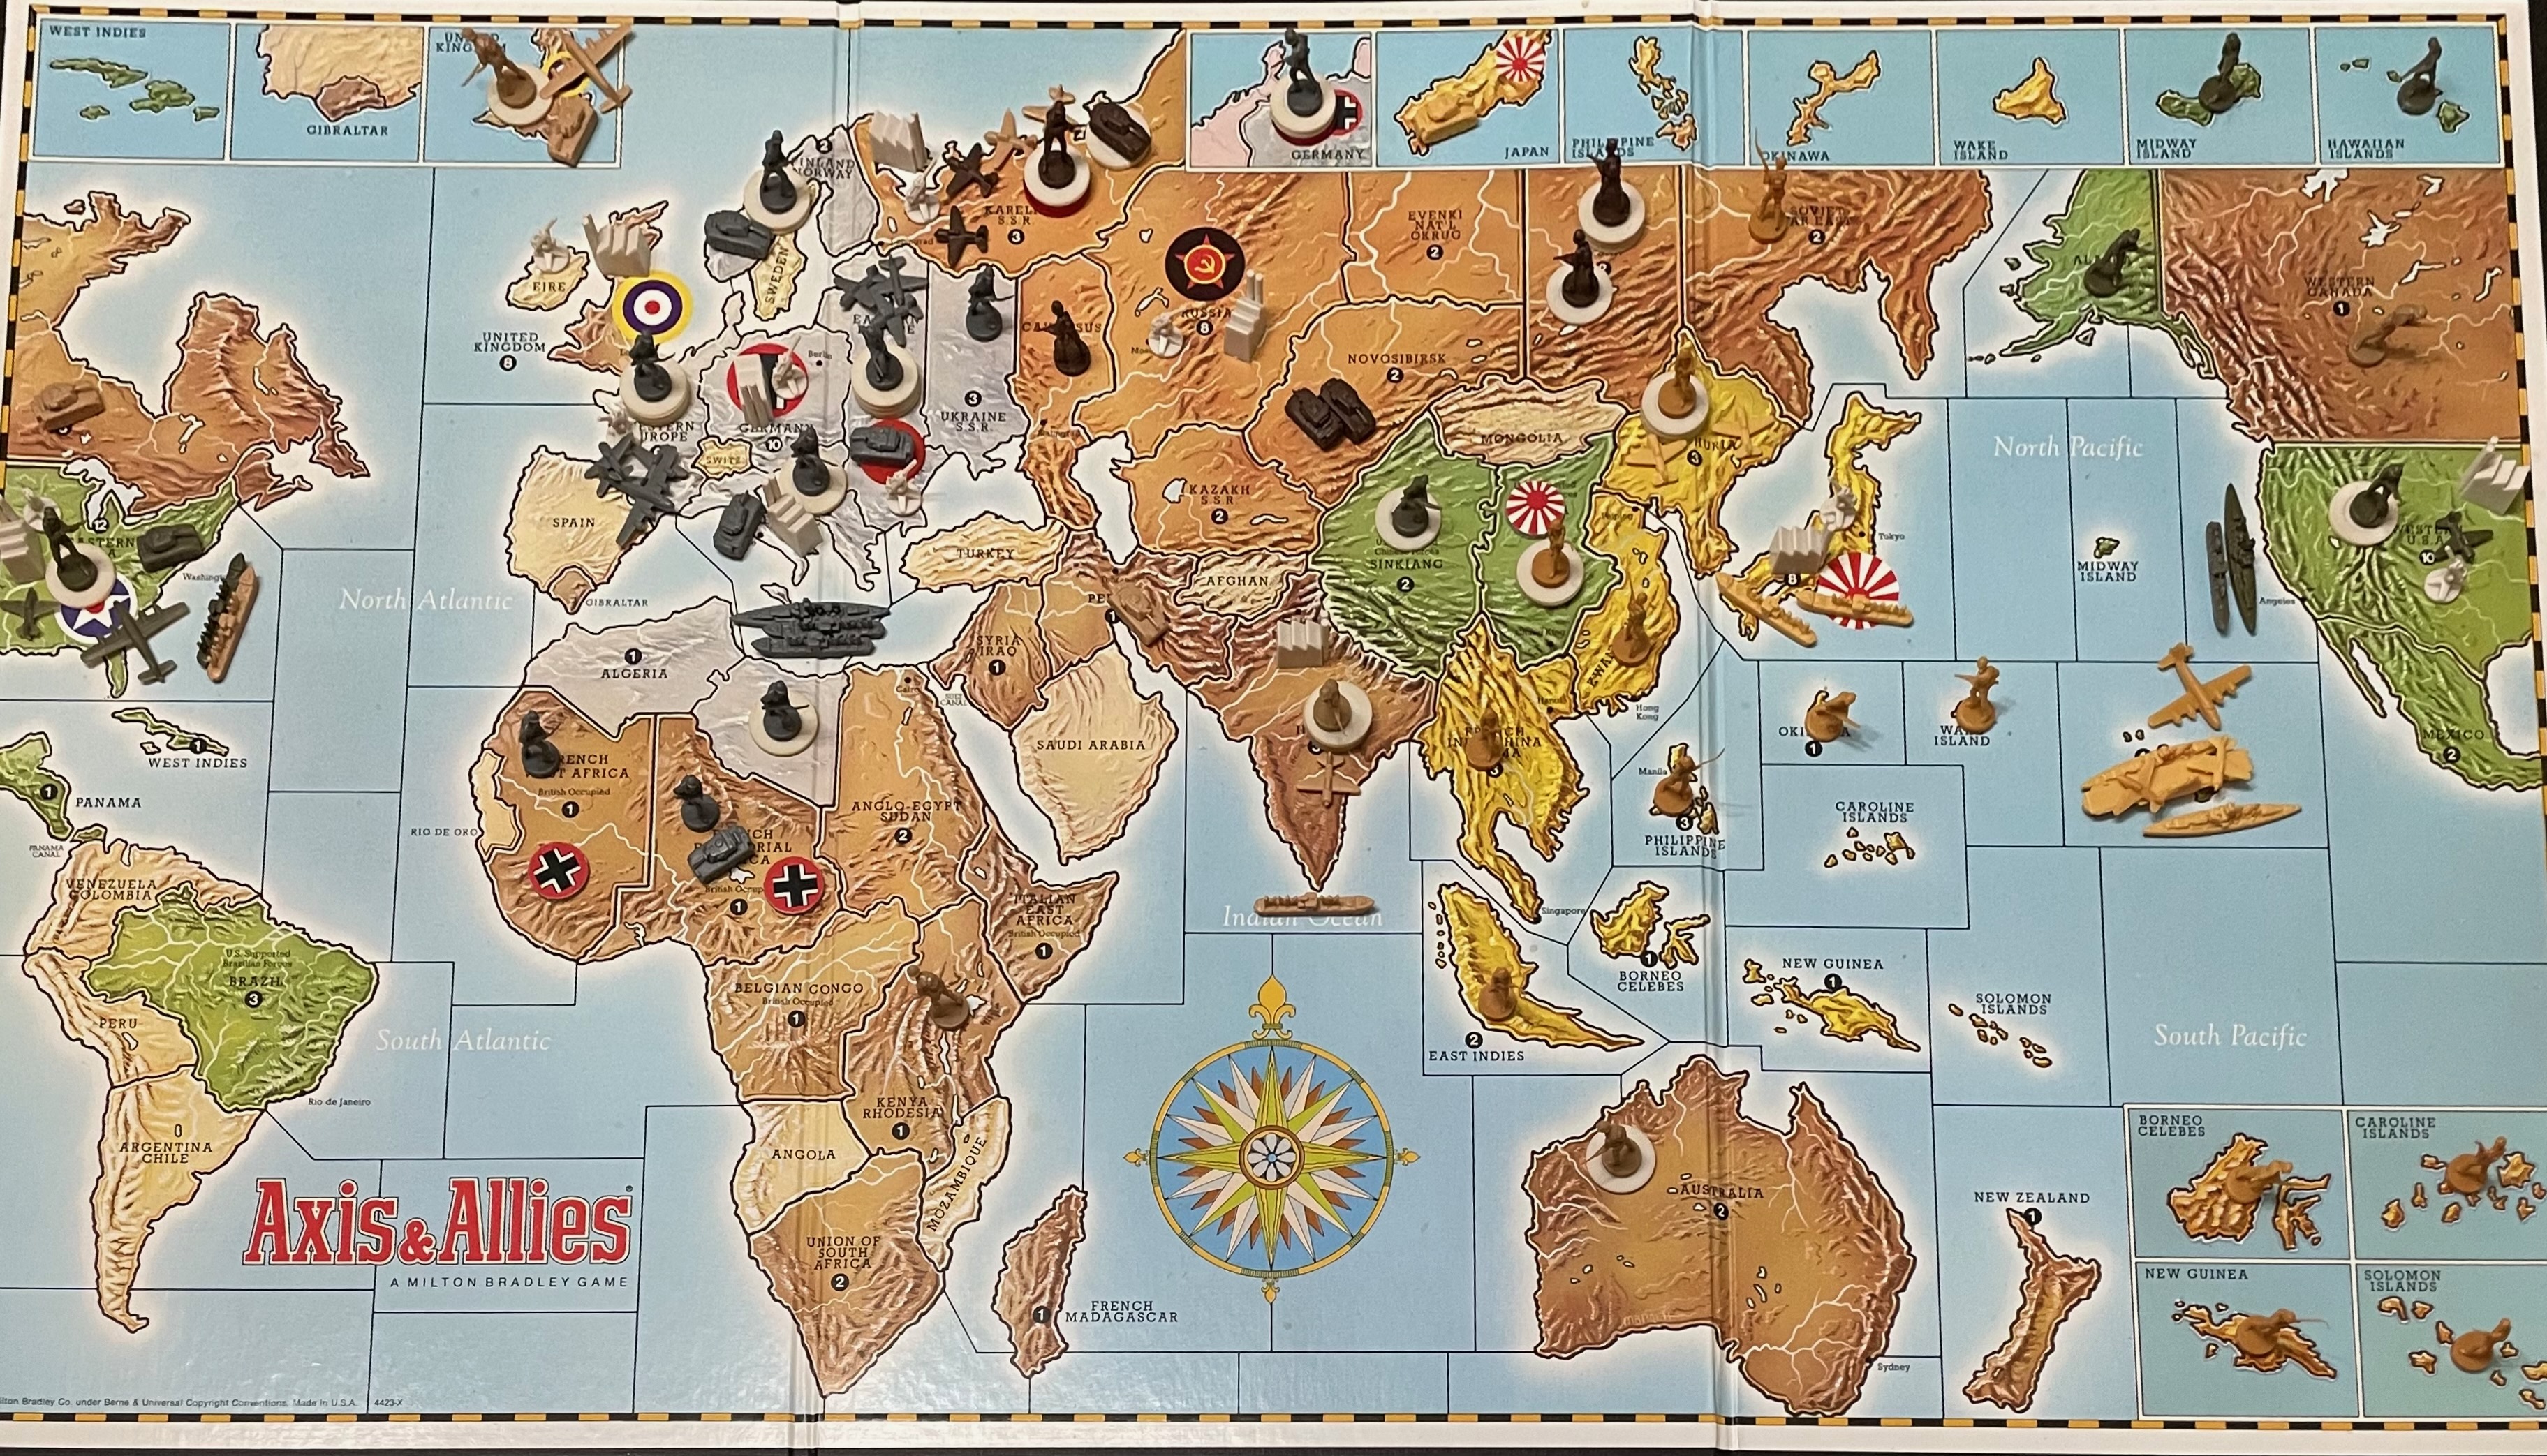 Board After Japan's First Turn